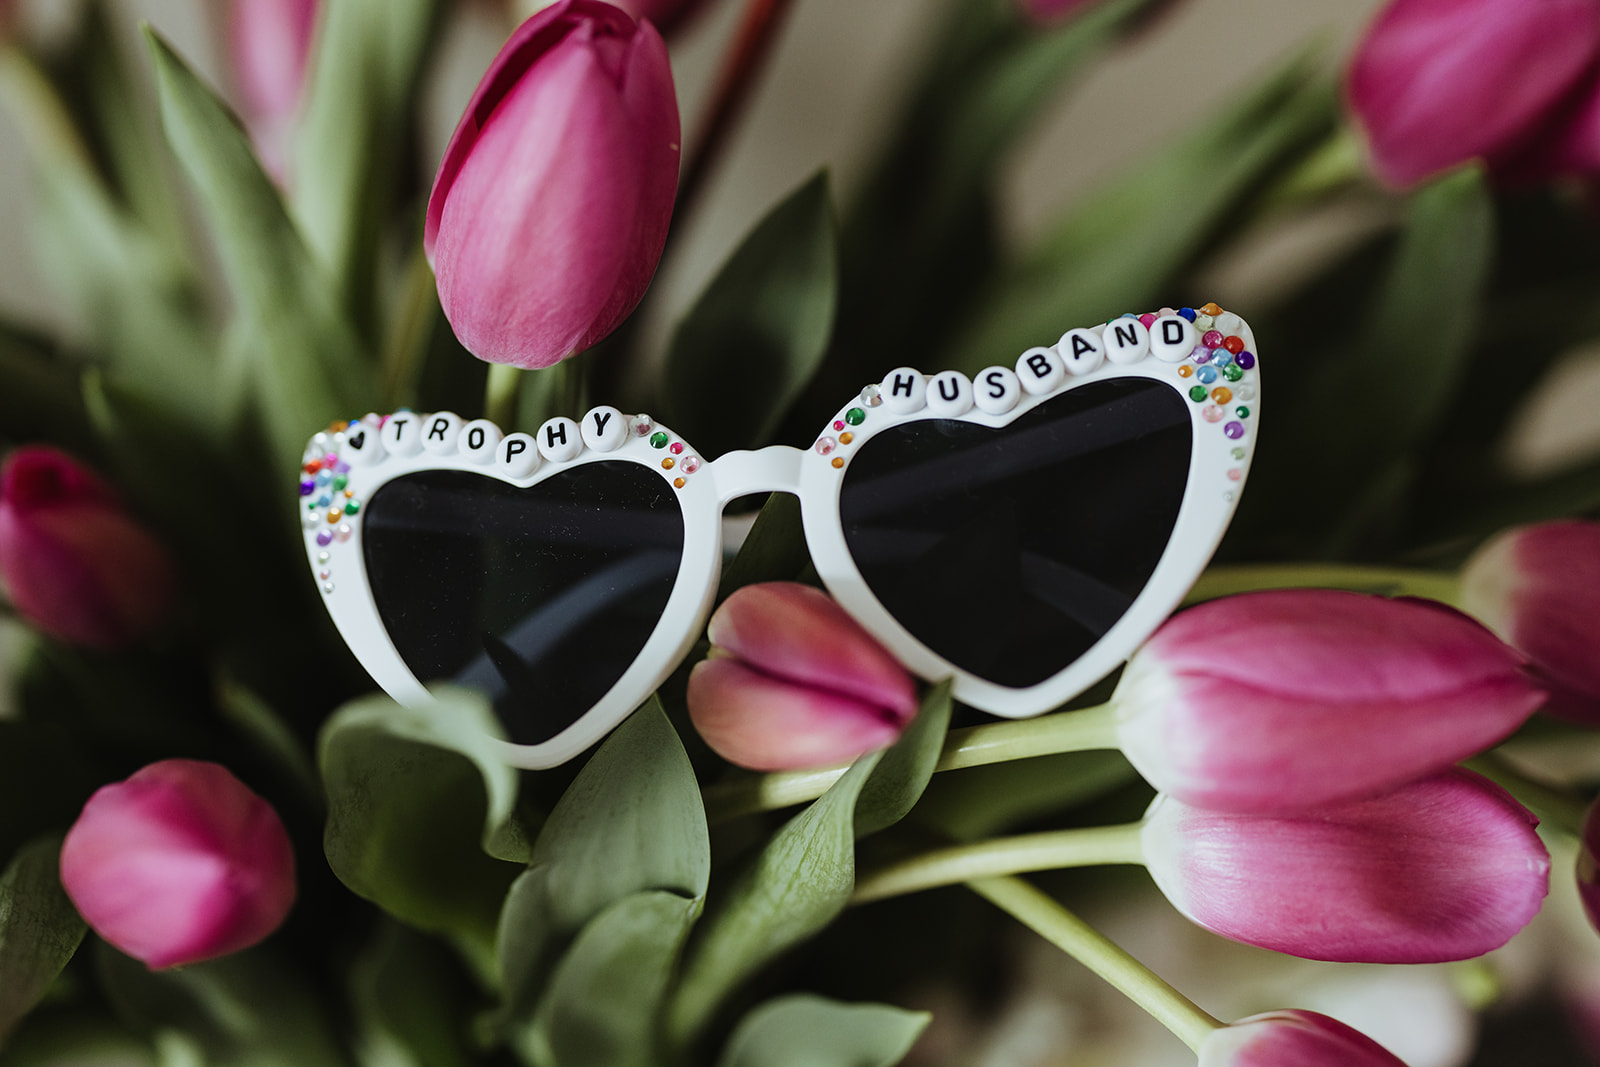 bedazzled heart shaped glasses that say "trophy husband" with pink tulips in the background